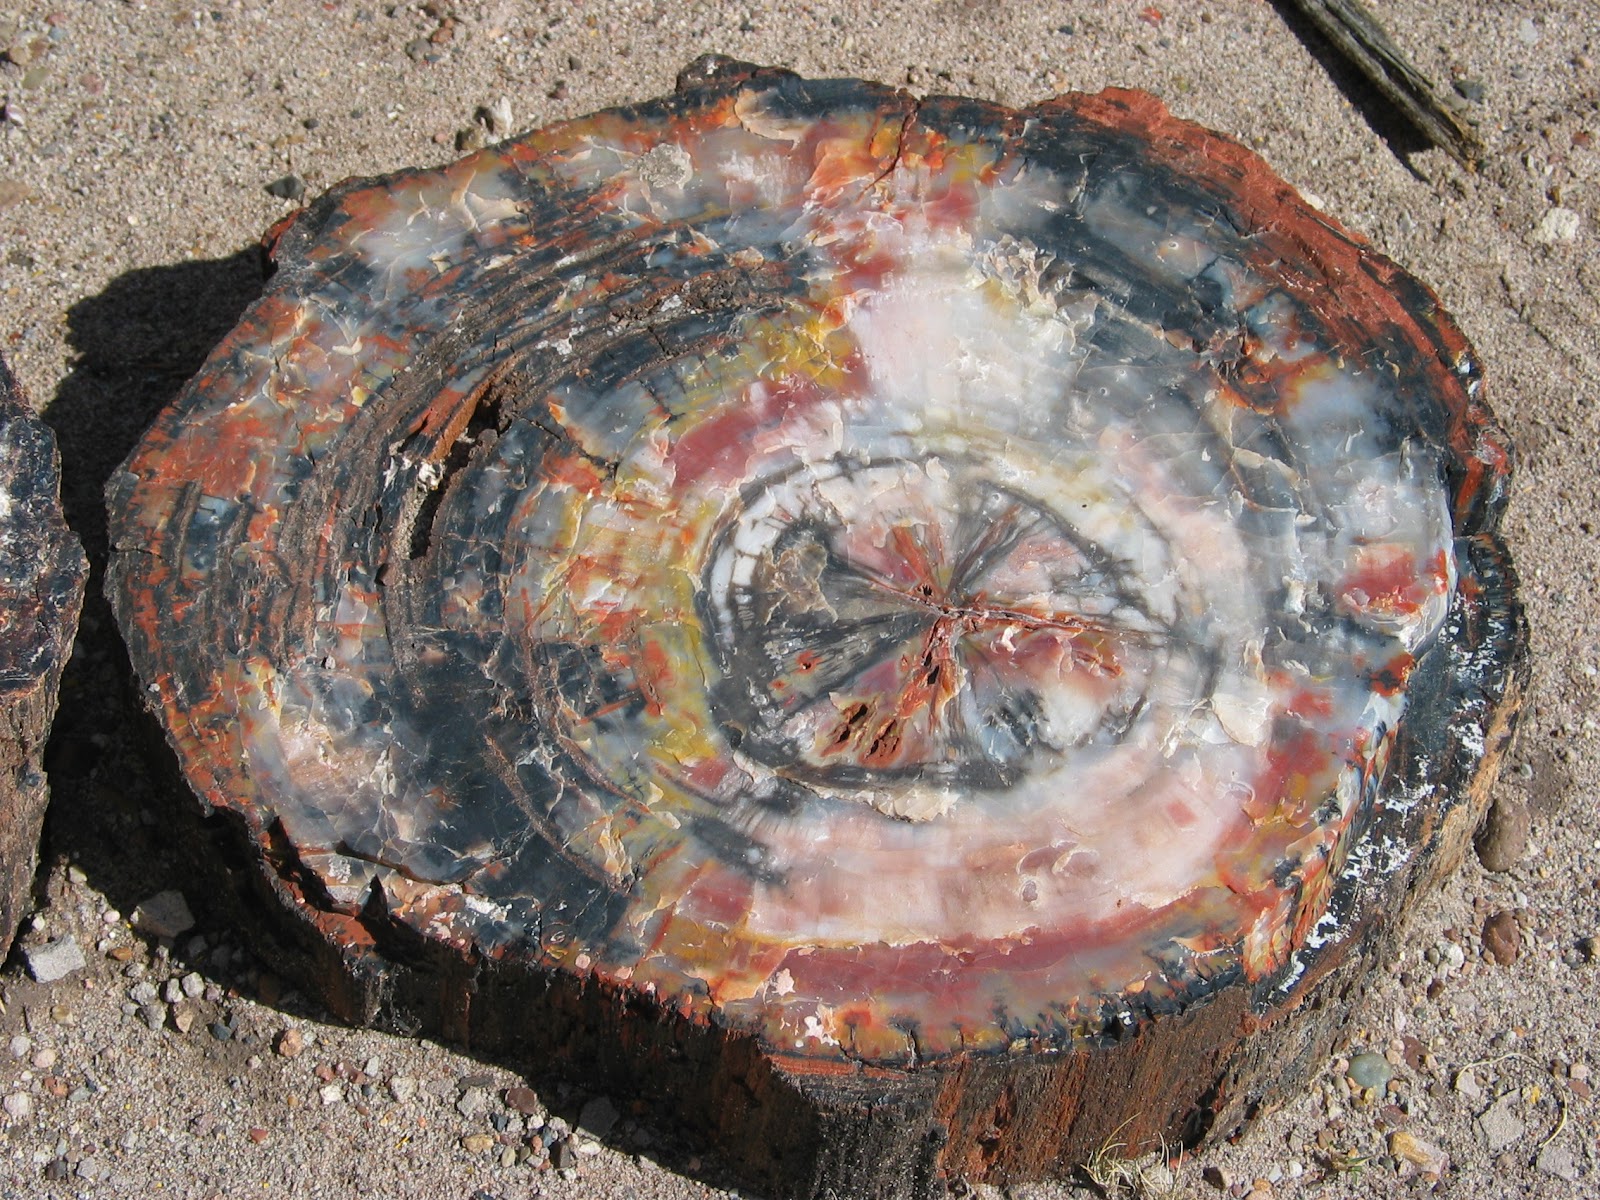 Original structure cut where you can see the growth rings and their ranges of colors.